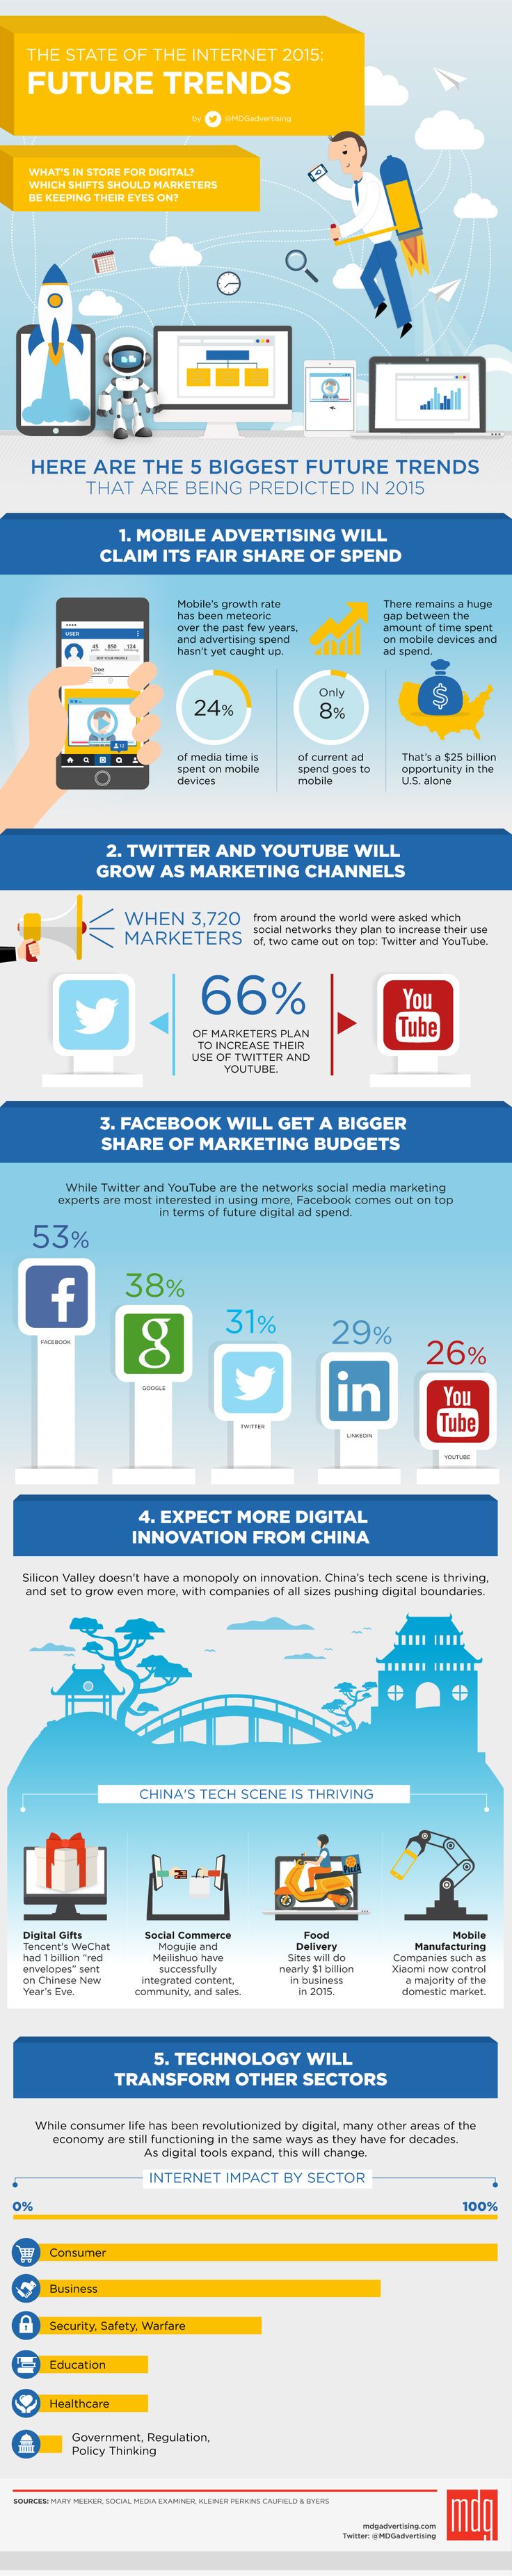 Digital-Marketing-Here-are-the-5-biggest-future-trends-that-being-predicted-in-2015-infographic Digital Marketing : Here are the 5 biggest future trends that being predicted in 2015 - #infographic